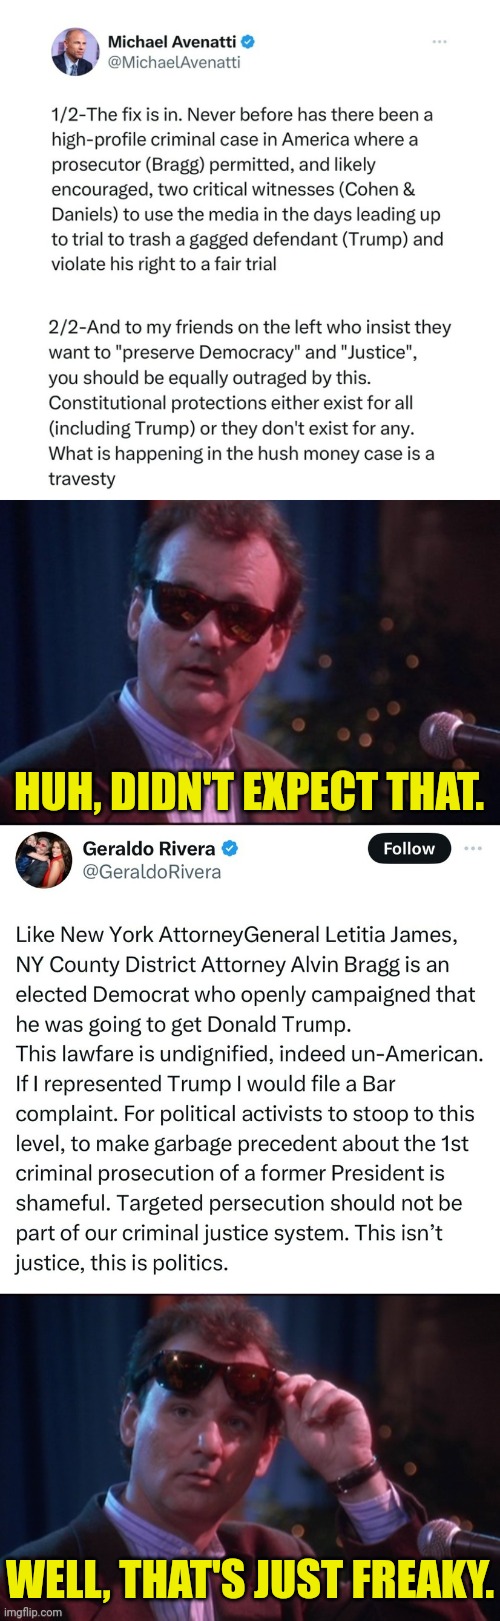 It's gotta be bad for them to say this | HUH, DIDN'T EXPECT THAT. WELL, THAT'S JUST FREAKY. | image tagged in bill murray glasses take | made w/ Imgflip meme maker